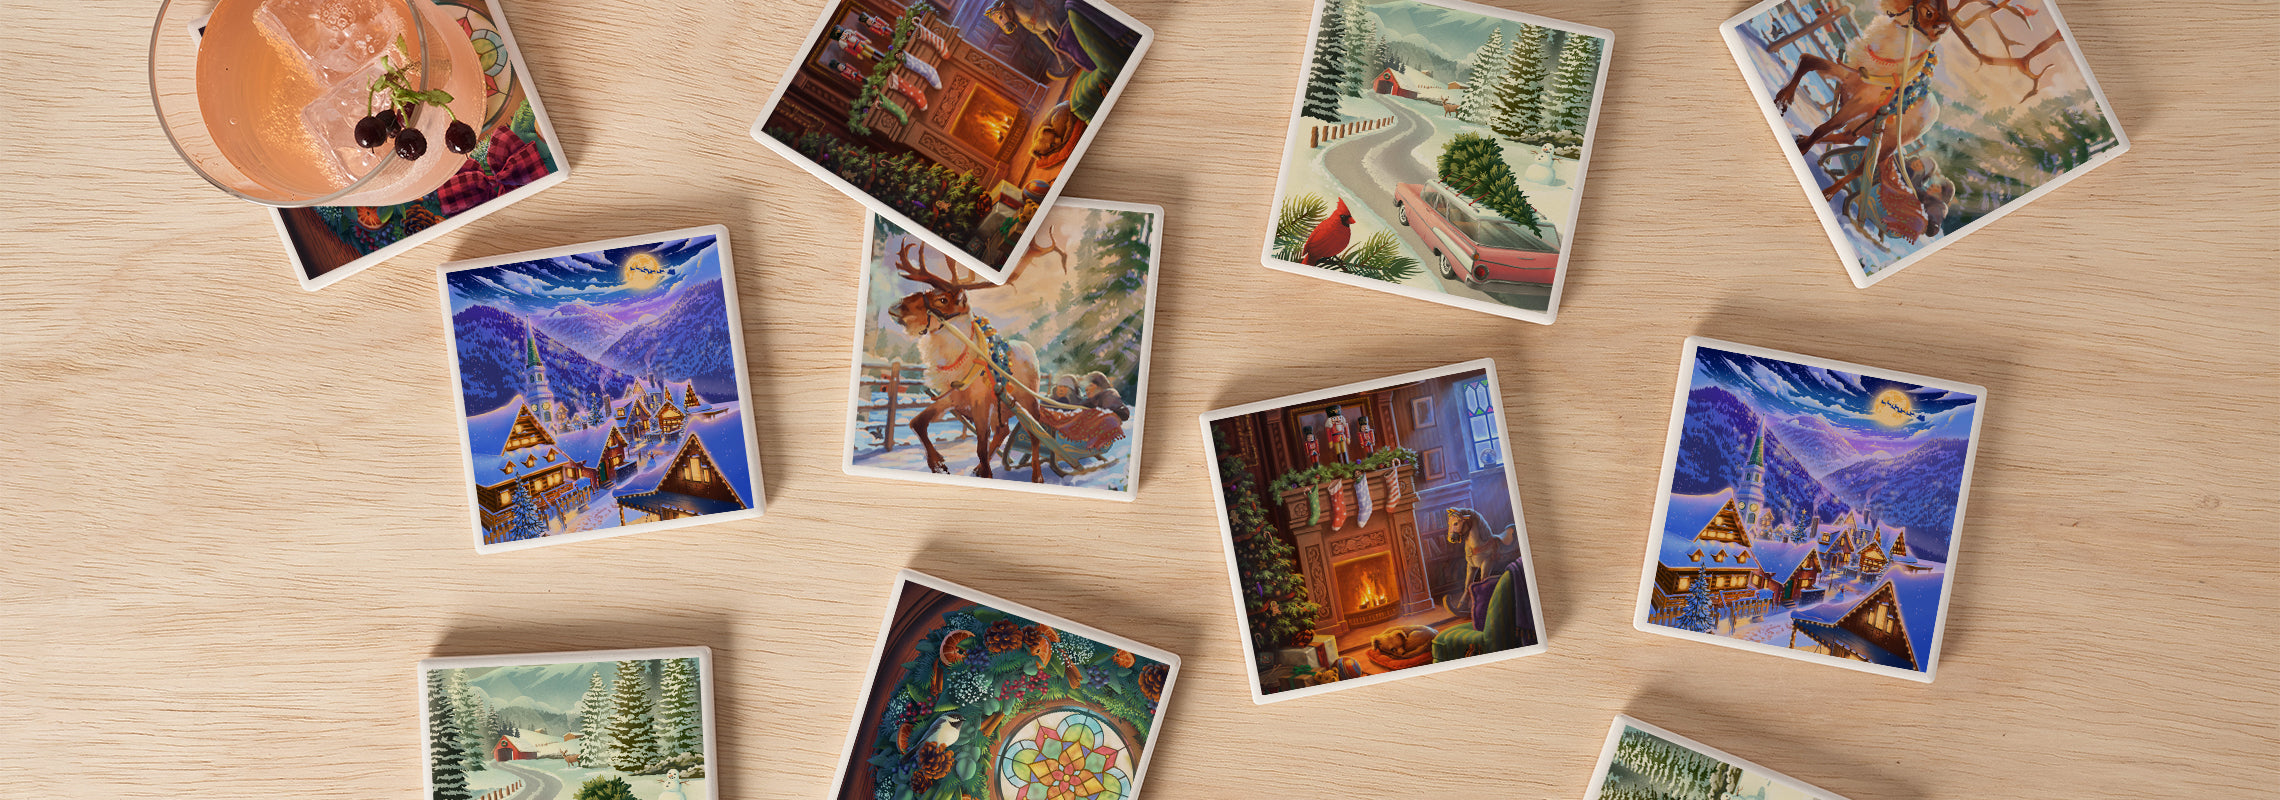 Holiday themed coasters seen from above, resting on a light wood surface with a drink in the top left corner.